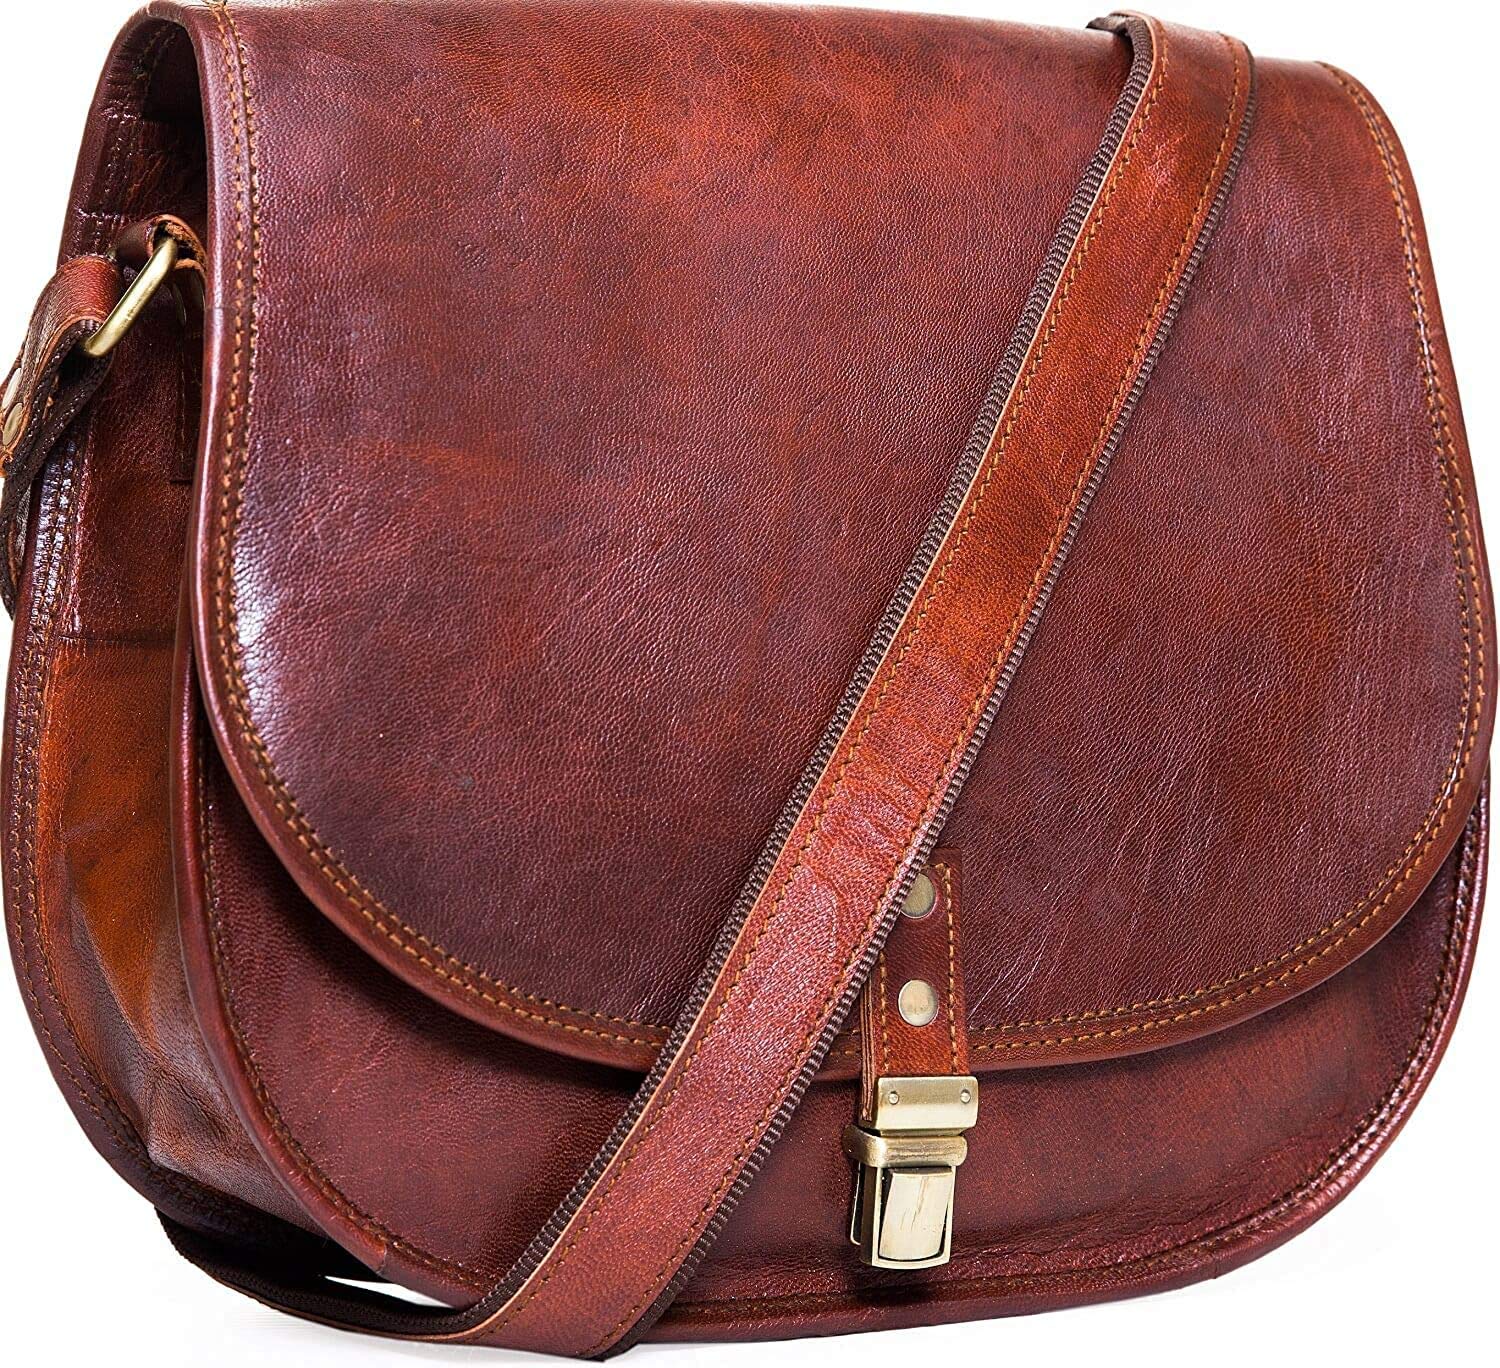 The Stellar Styles Leather Women's Handmade Pure Leather Shoulder